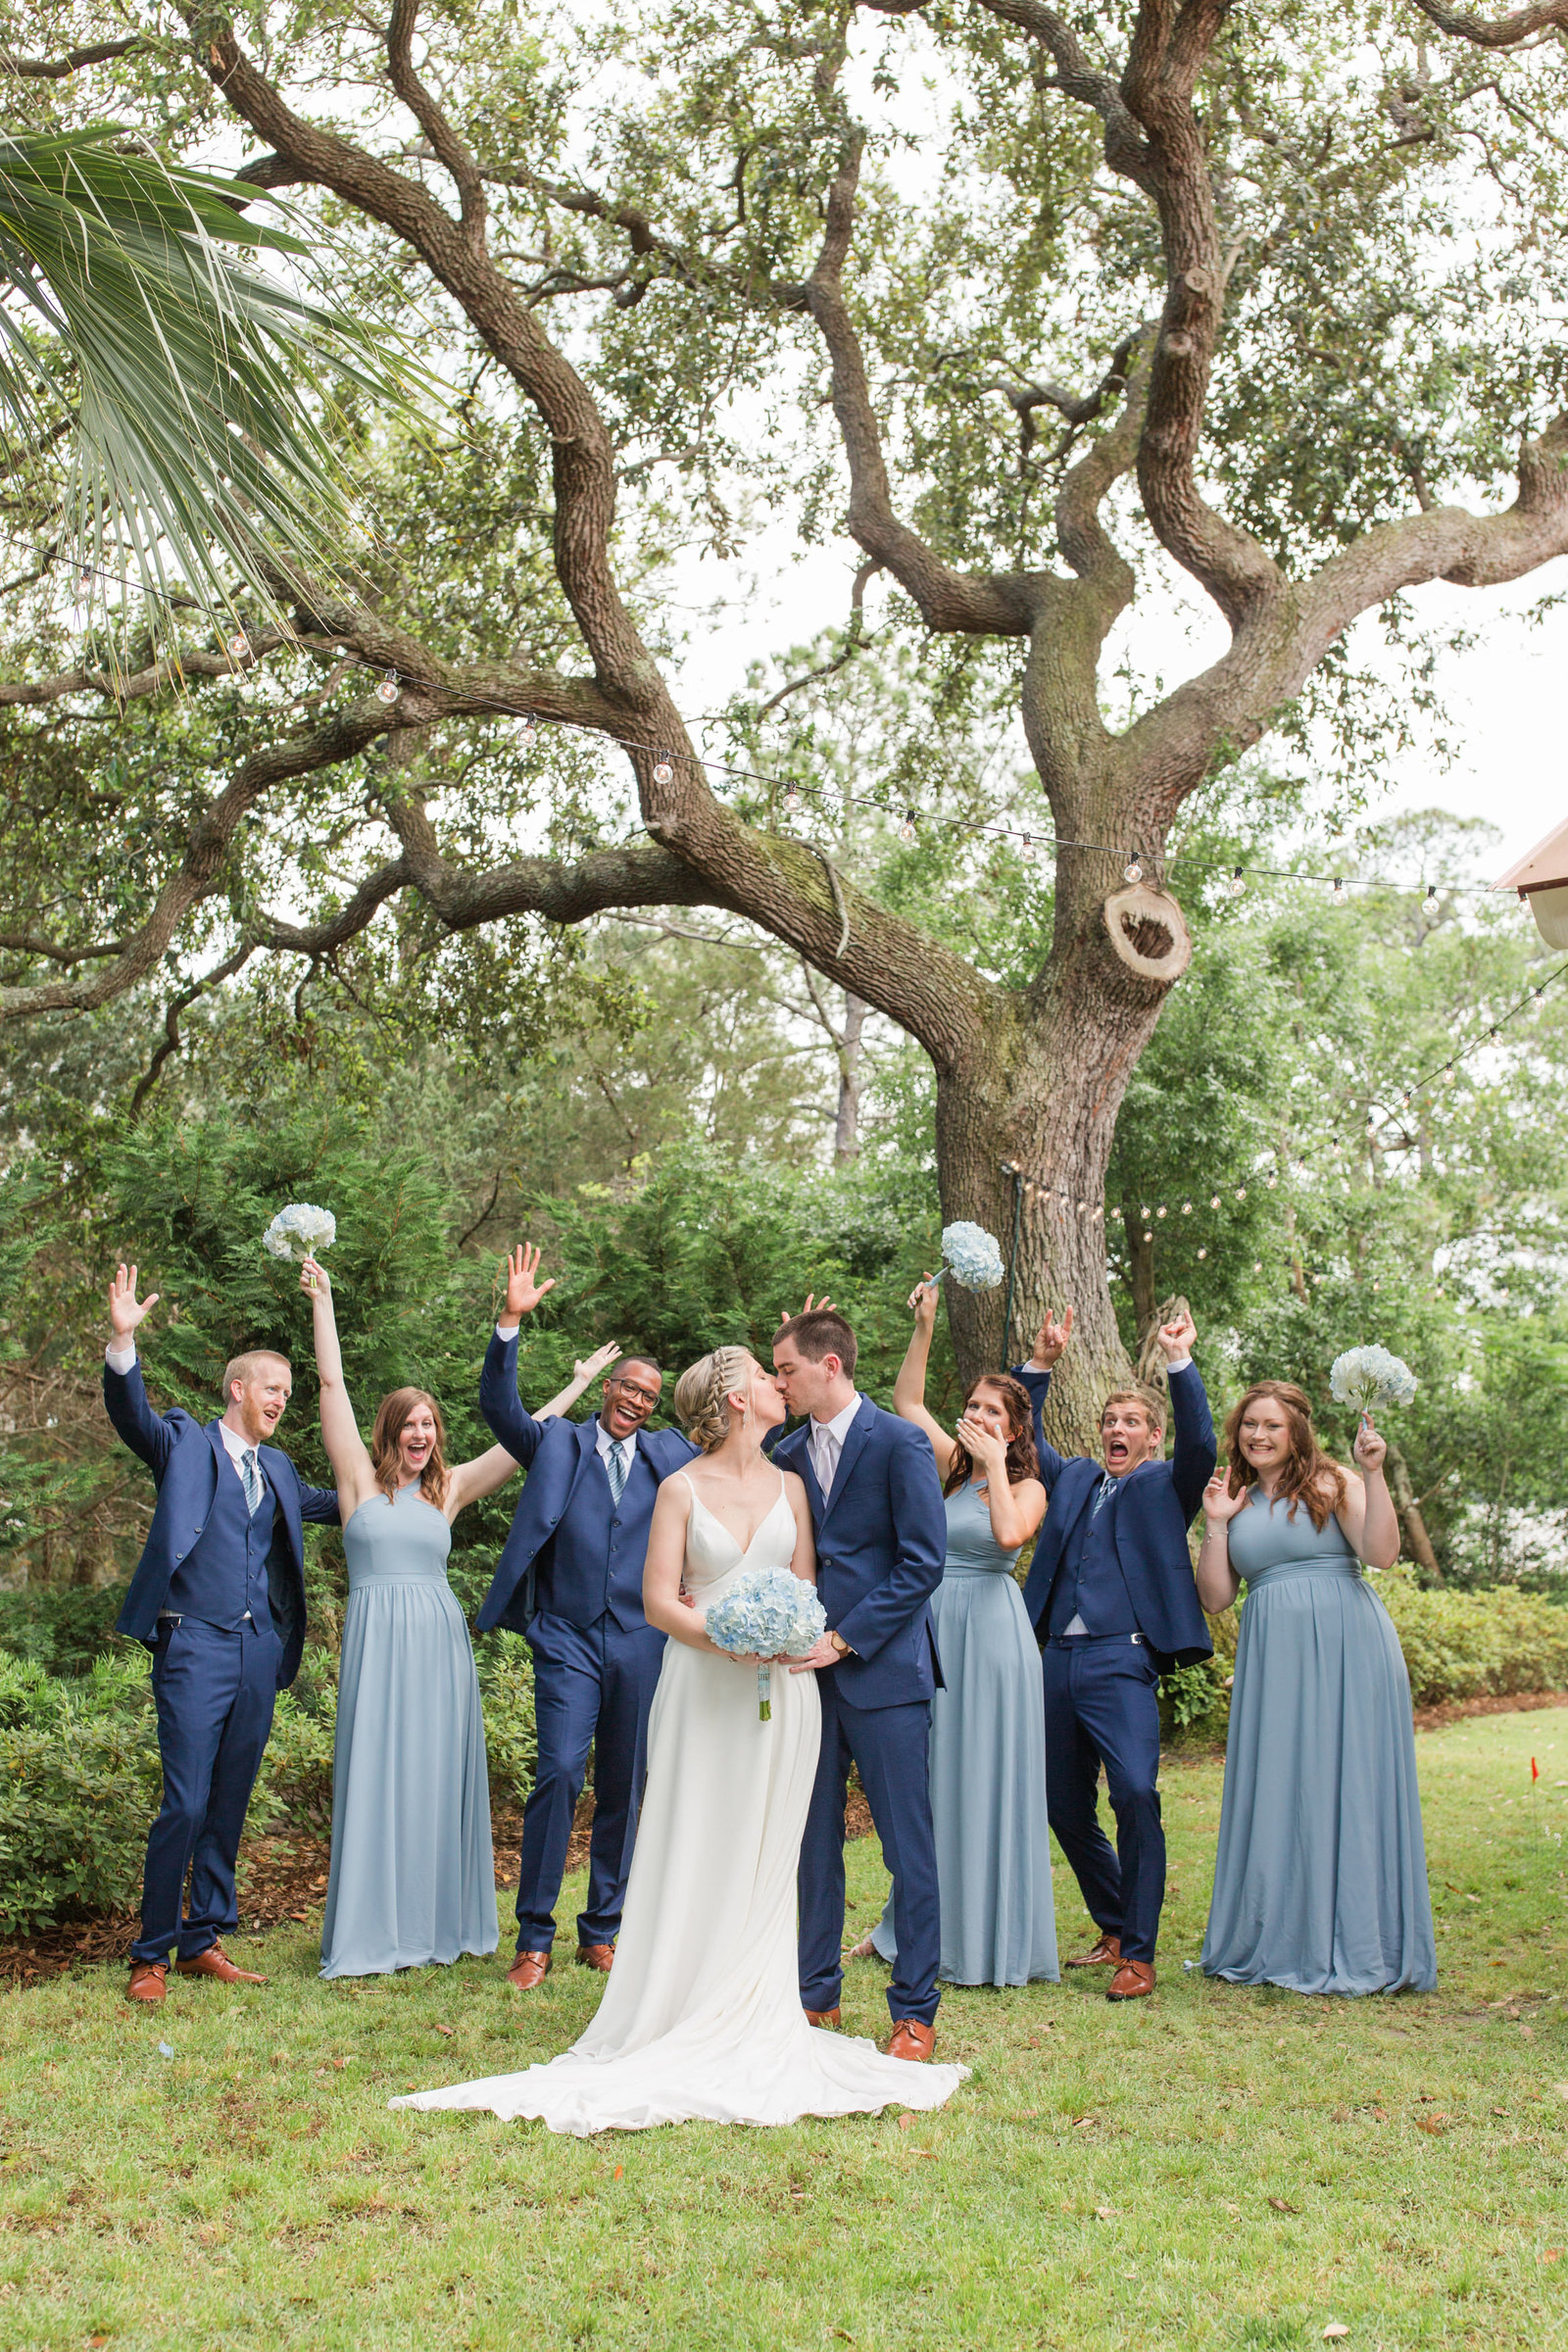 wedding party in blue dresses in front of oak trees cheering as bride and groom kiss